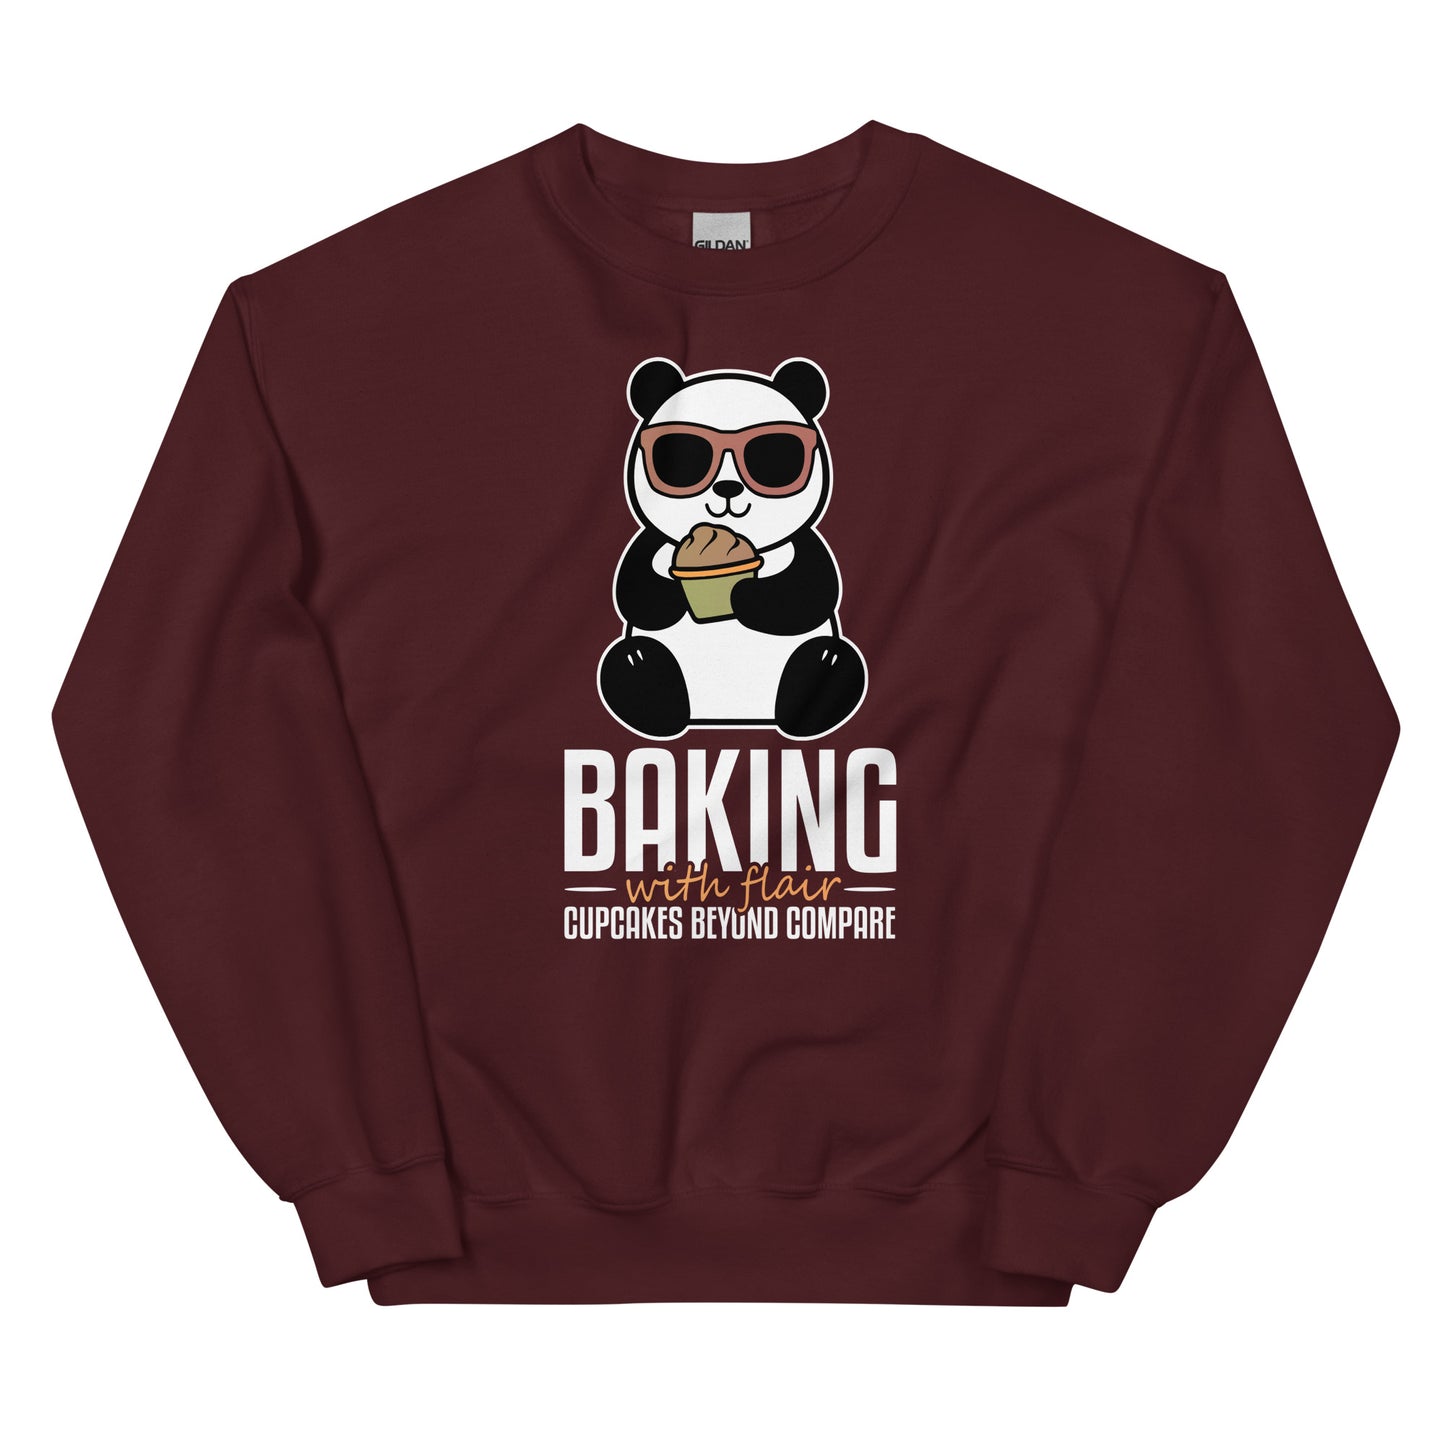 Baking with Flair Cupcakes beyond Compare Pullover